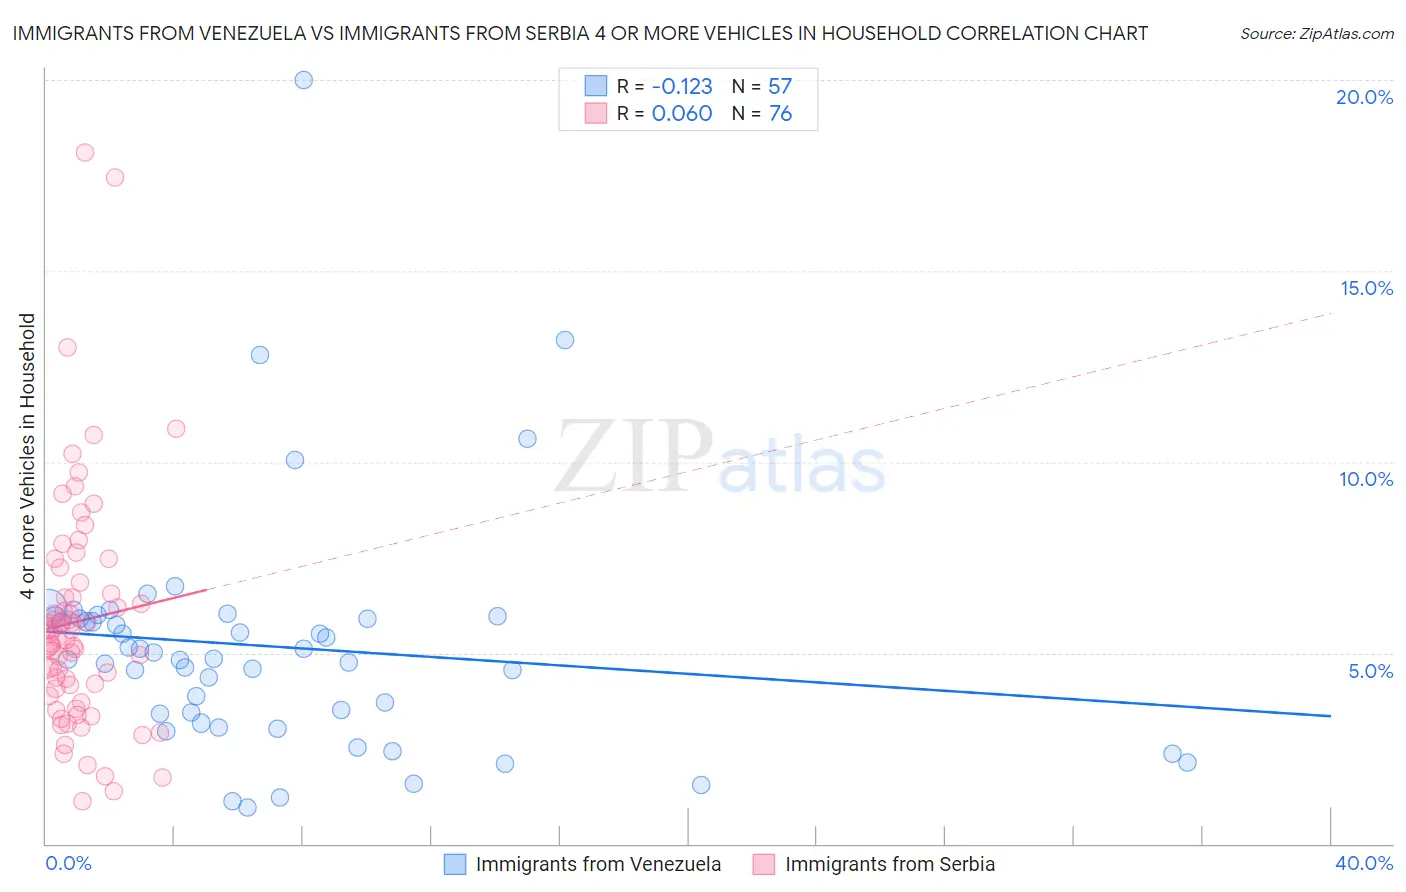 Immigrants from Venezuela vs Immigrants from Serbia 4 or more Vehicles in Household